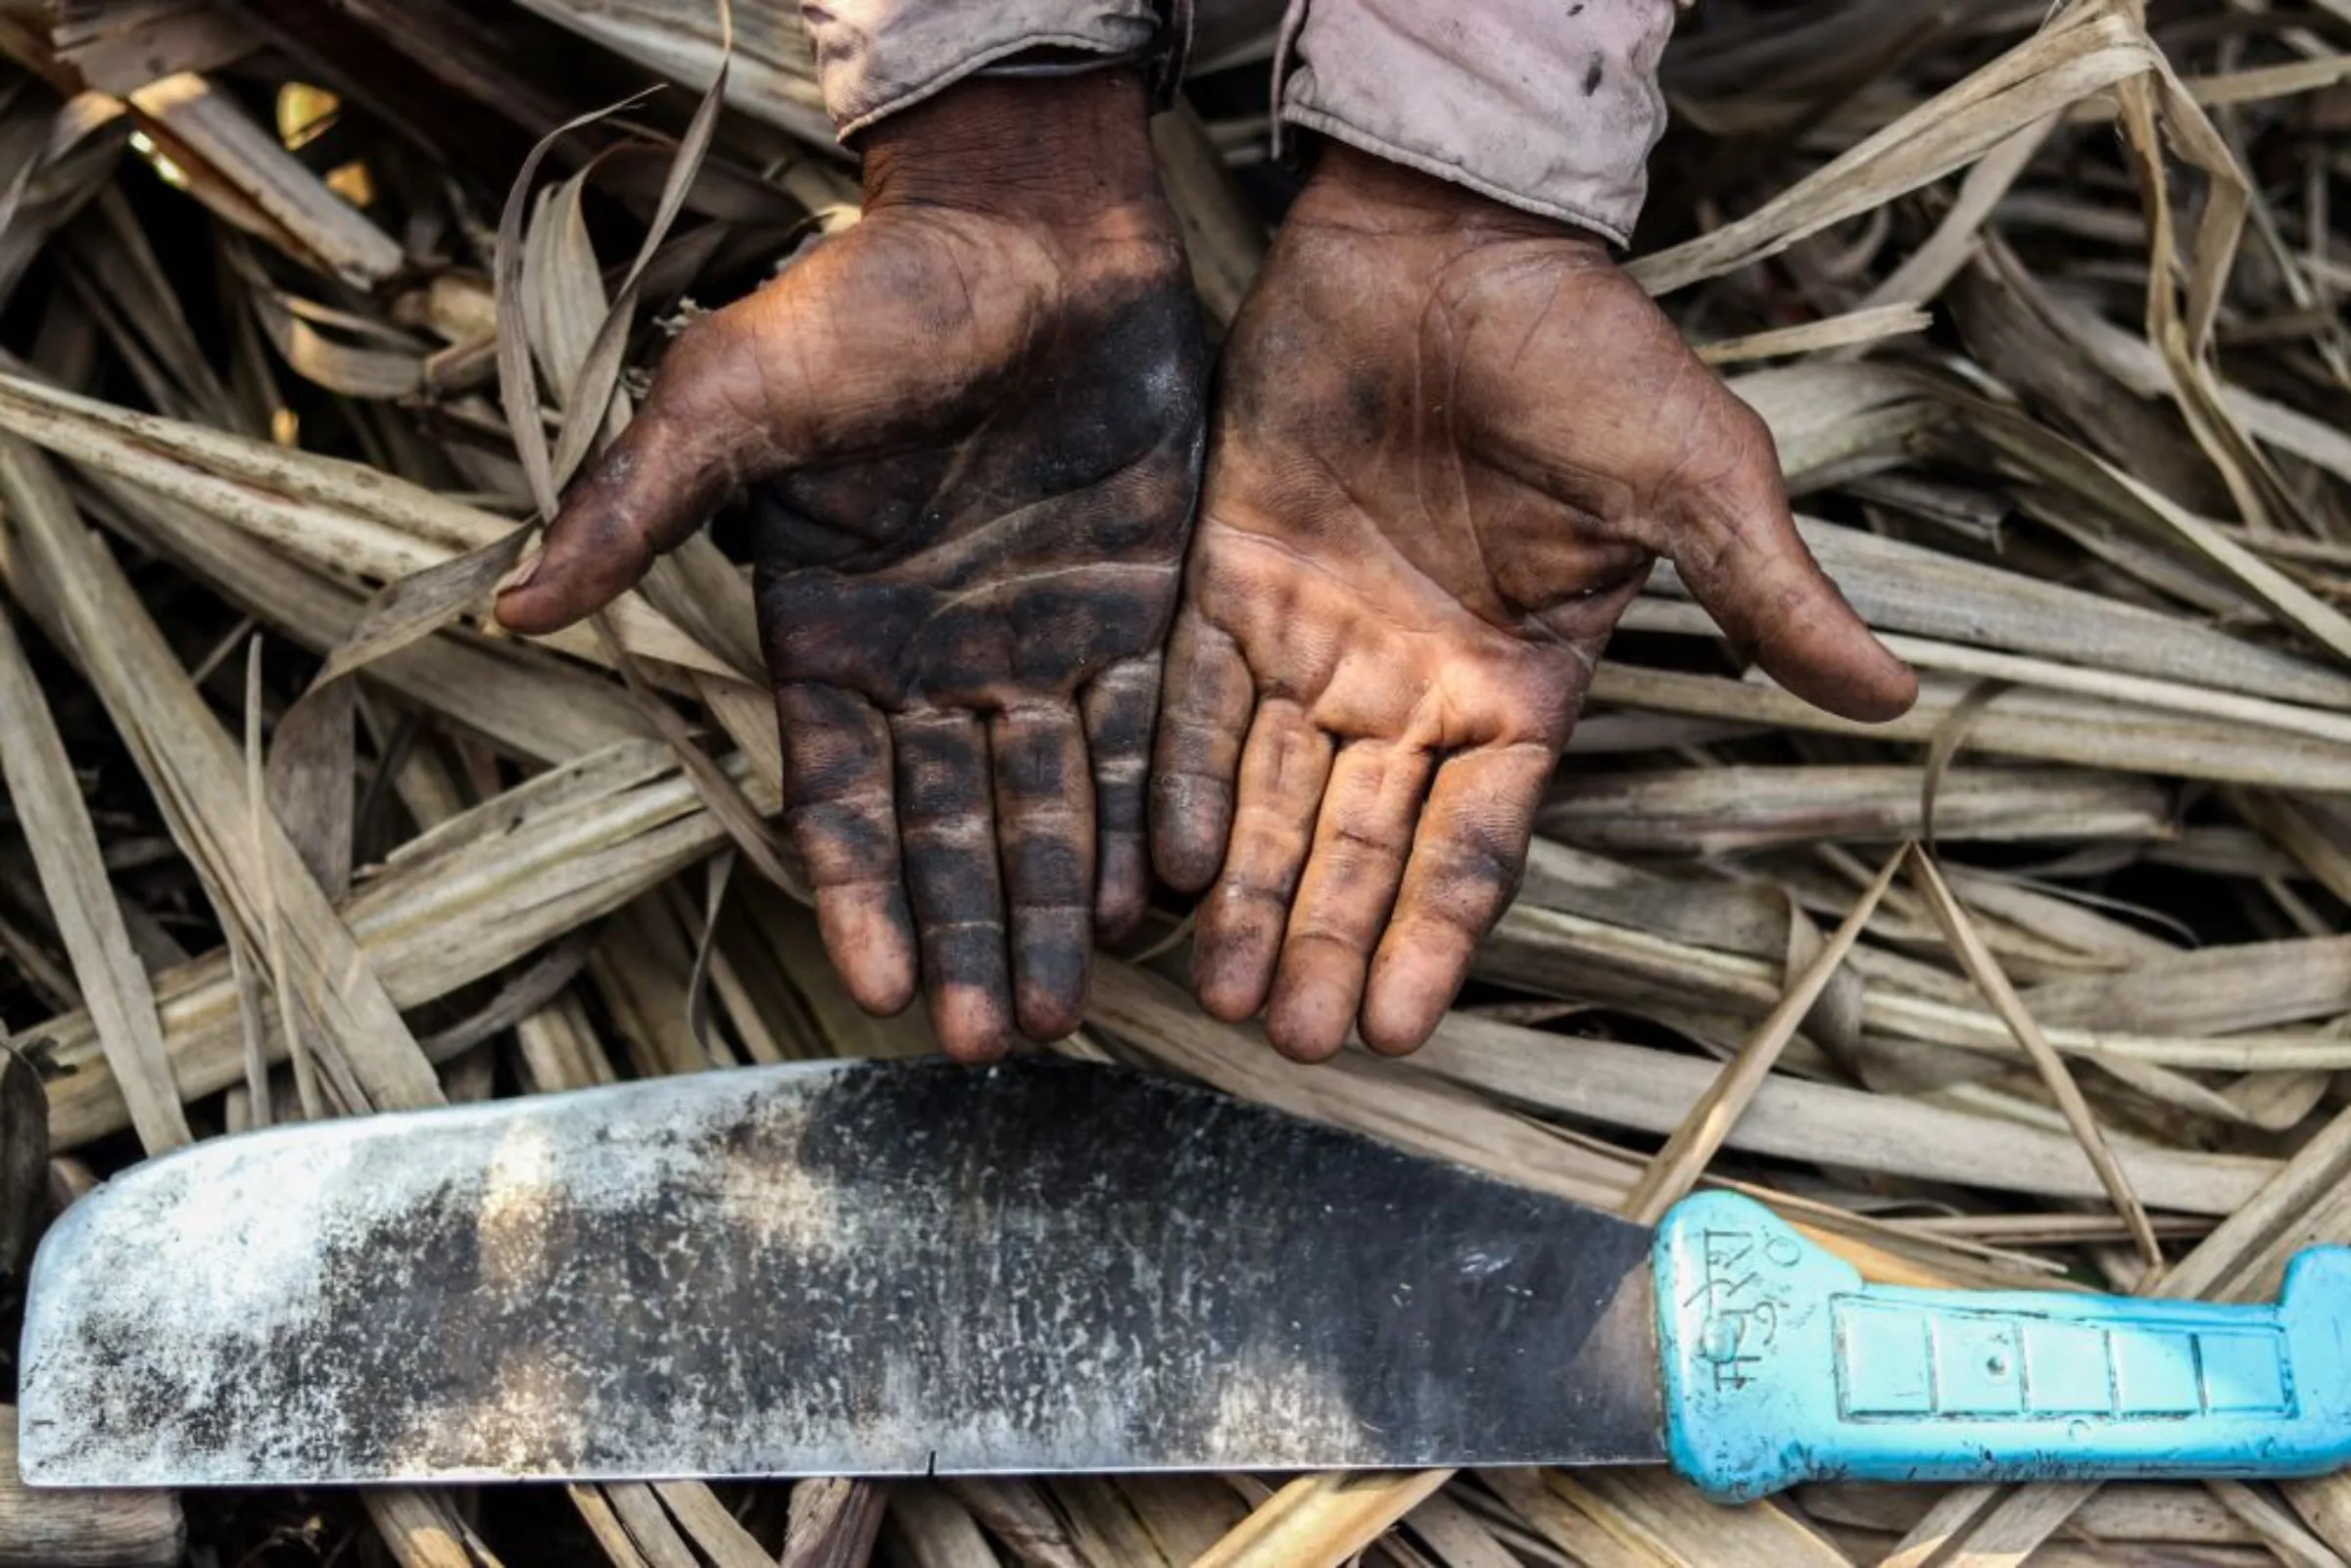 A sugarcane cutter showing his hands after working in the fields for several hours without any protective gear in a sugarcane field in in Maharashtra’s Khochi village, India. December 17, 2022